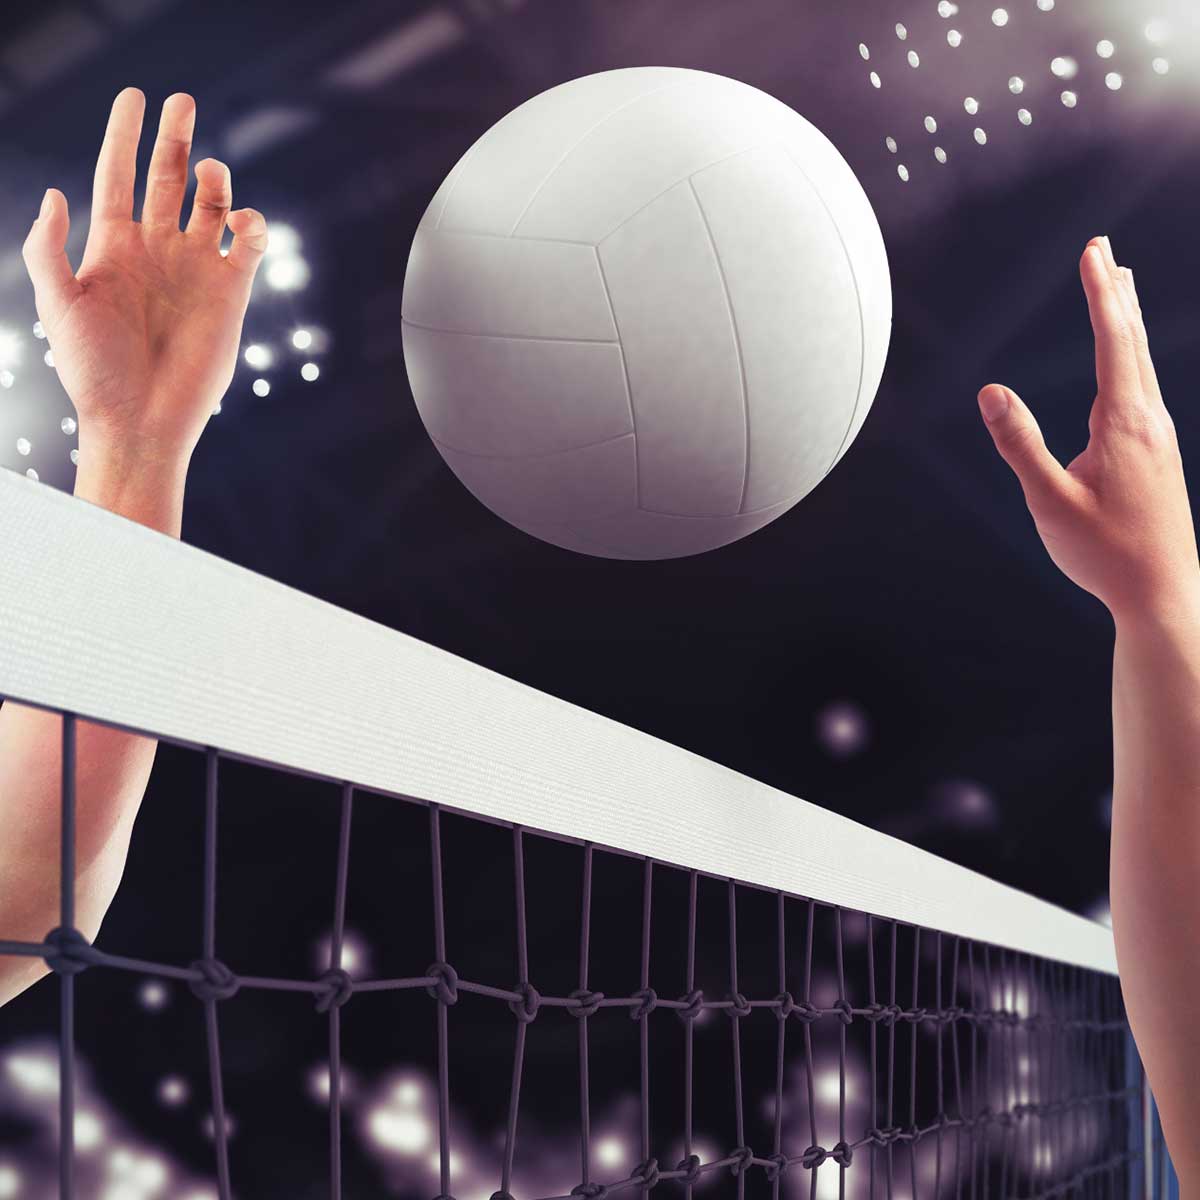 Volleyballs Manufacturers in Sherbrooke